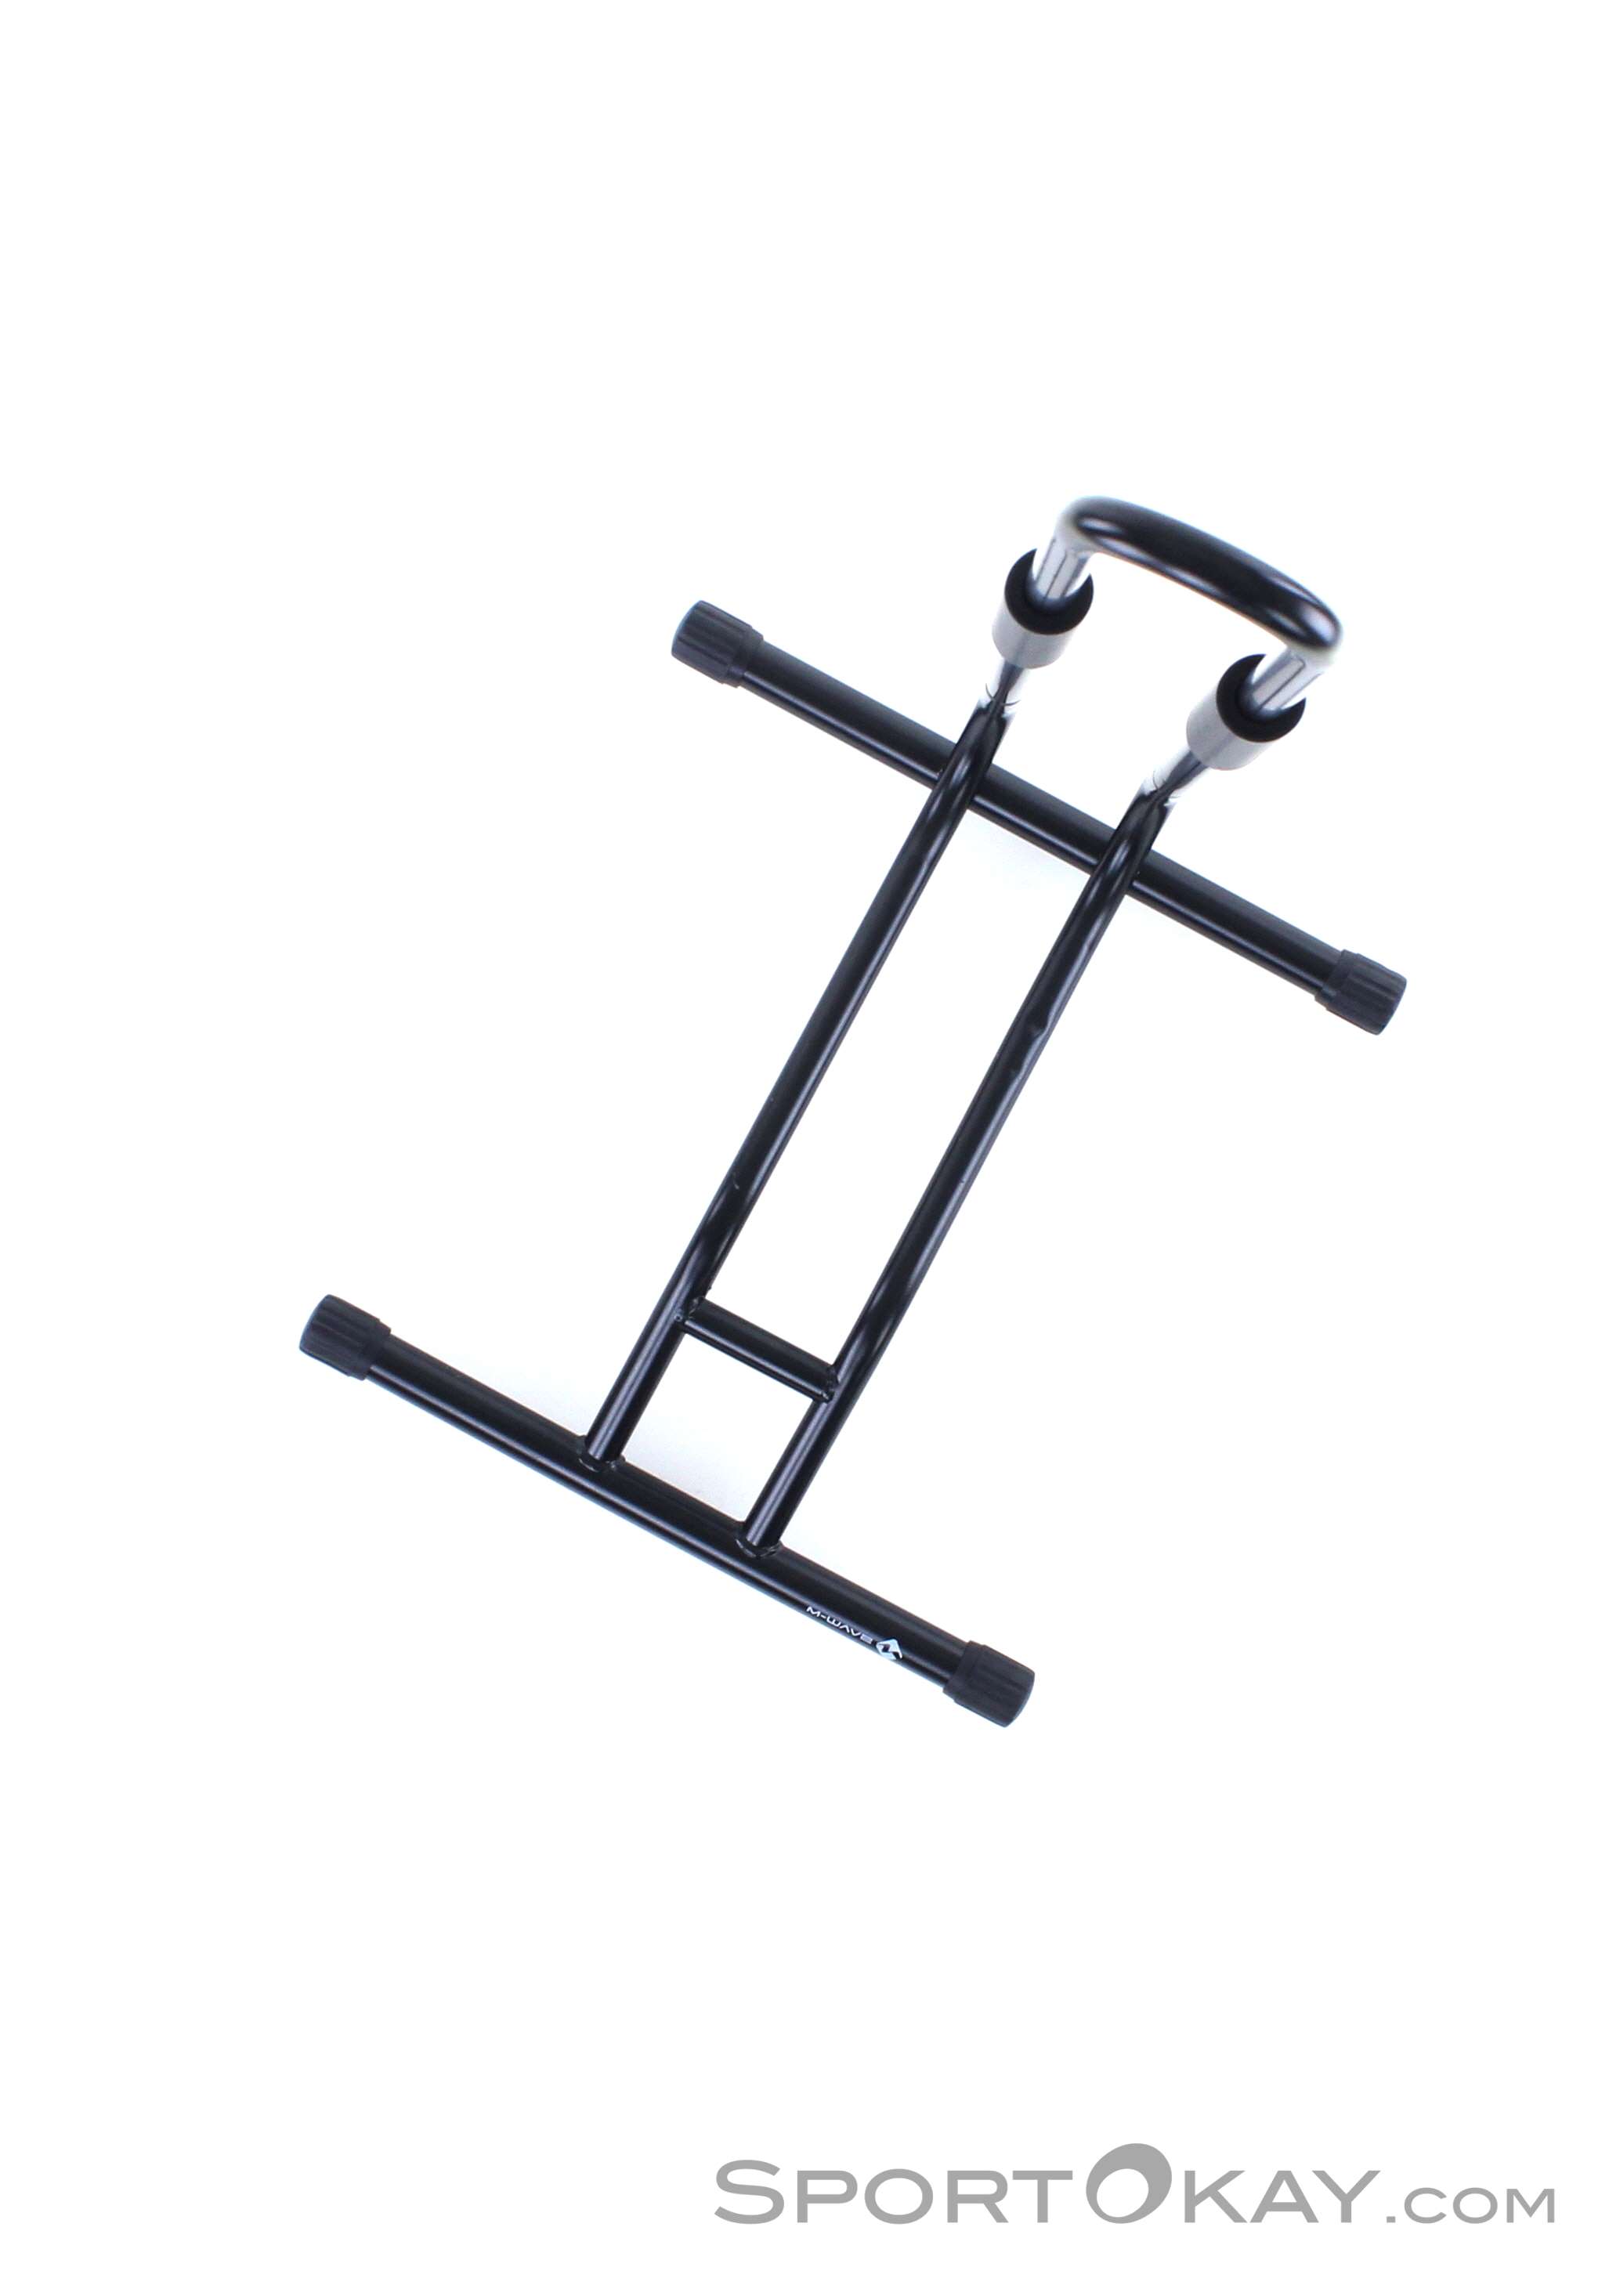 12-29-Inch Easystand Unisexs Bicycle Stand Black 